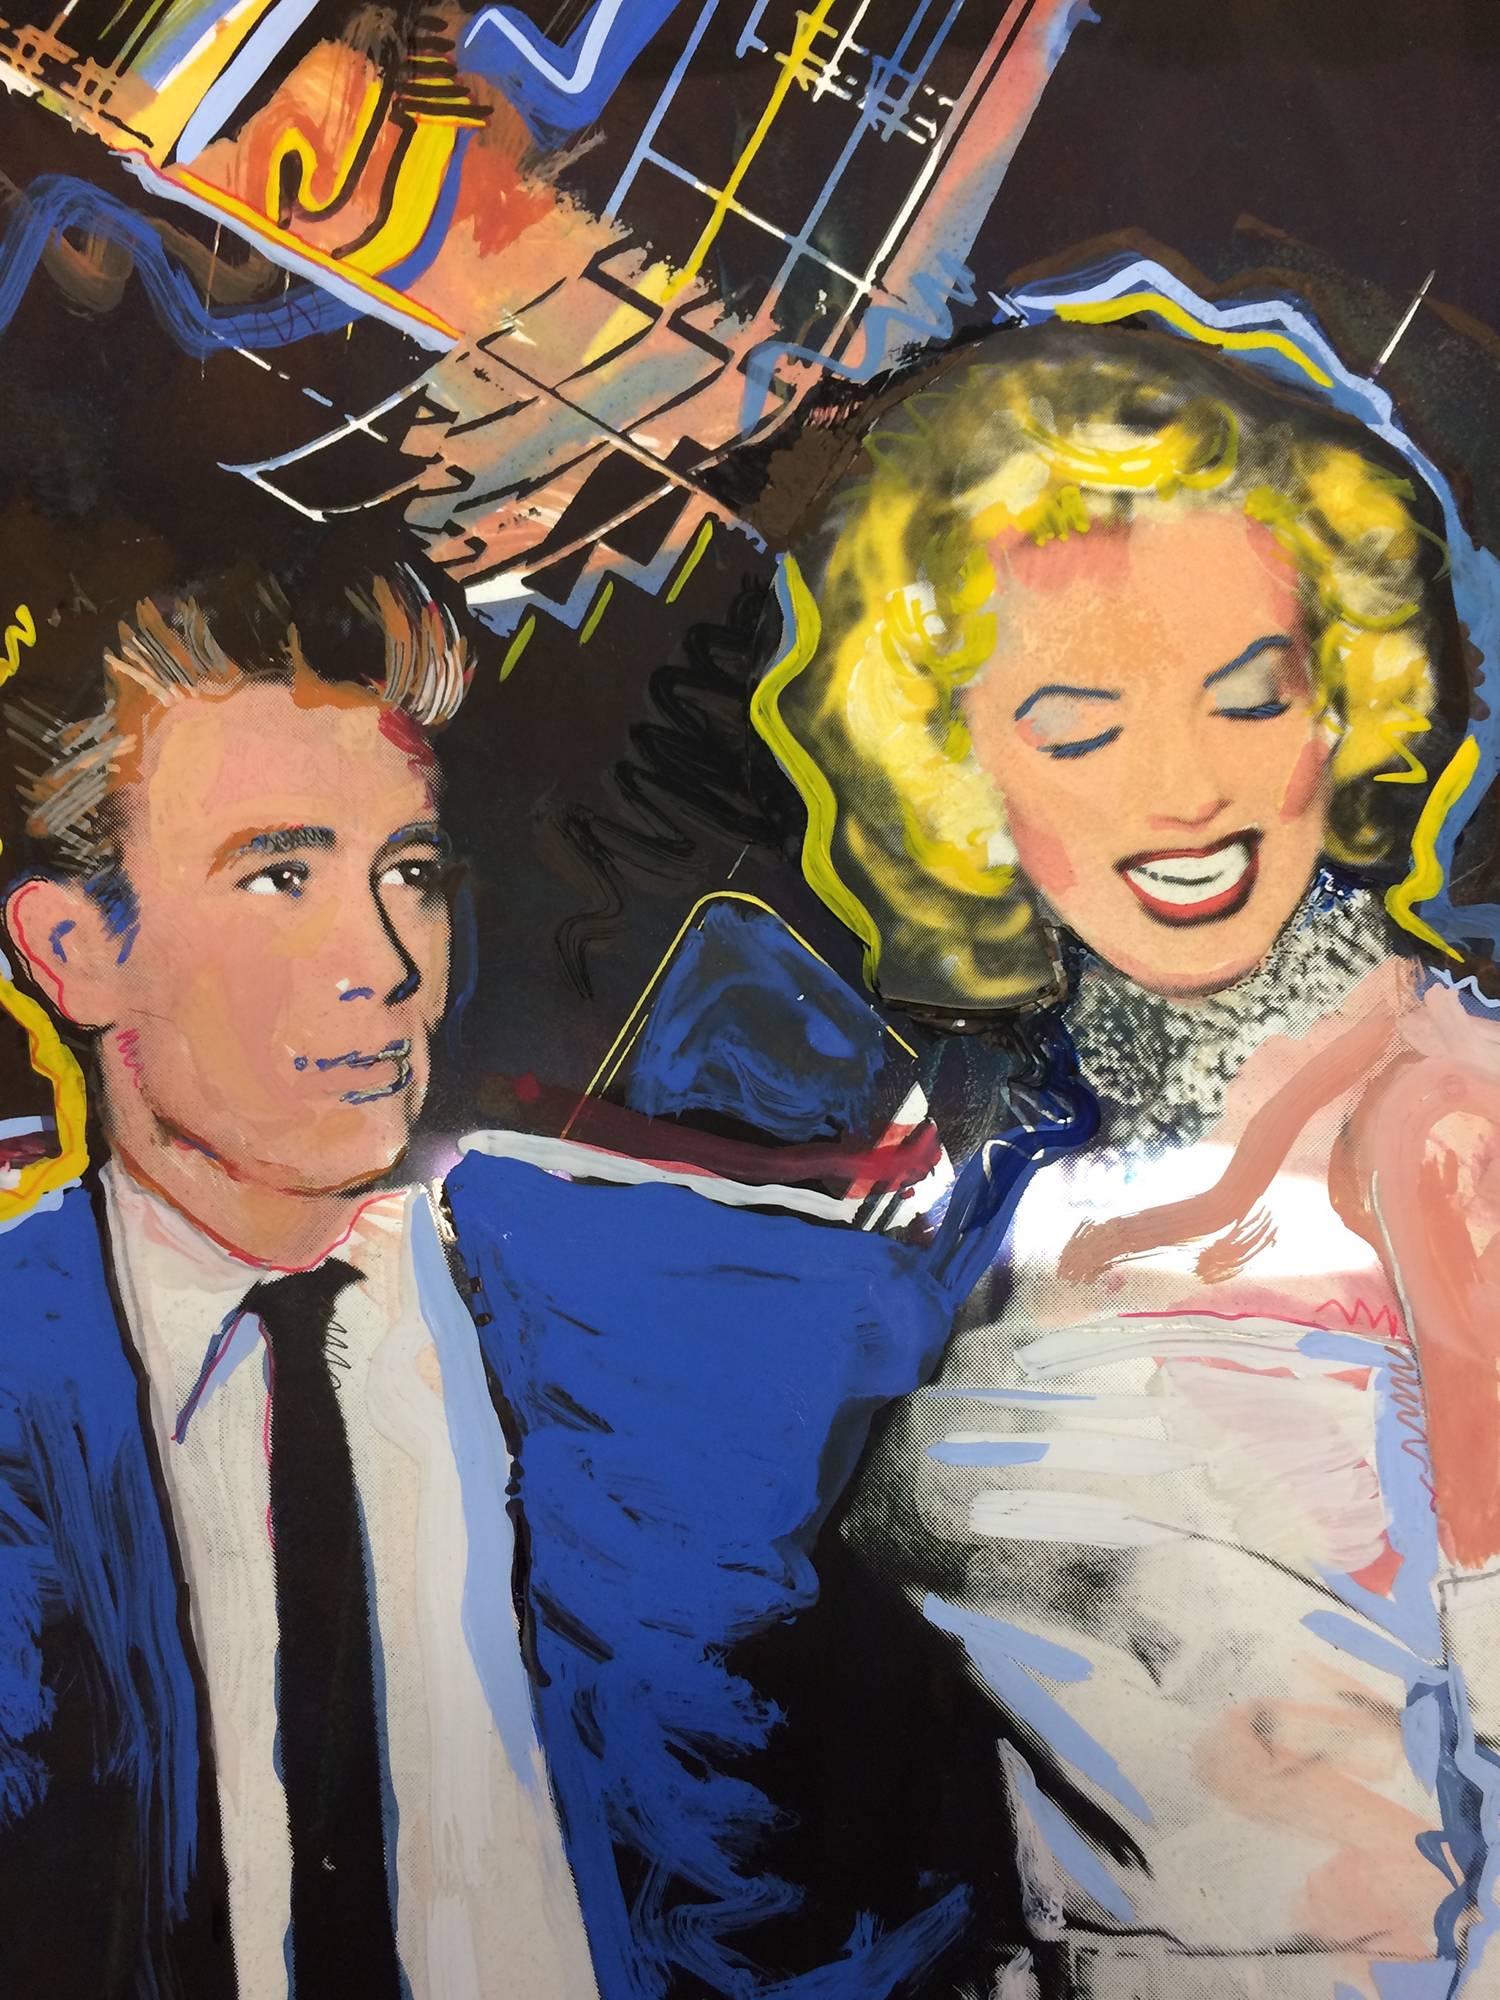 Description: The Original mixed media portrait of James Dean and Marilyn Monroe entitled James is that your hand down your pants? by artist Tony Cooper for the award winning Shoot that Tiger Art Studio circa 1984. The painting was used to create one